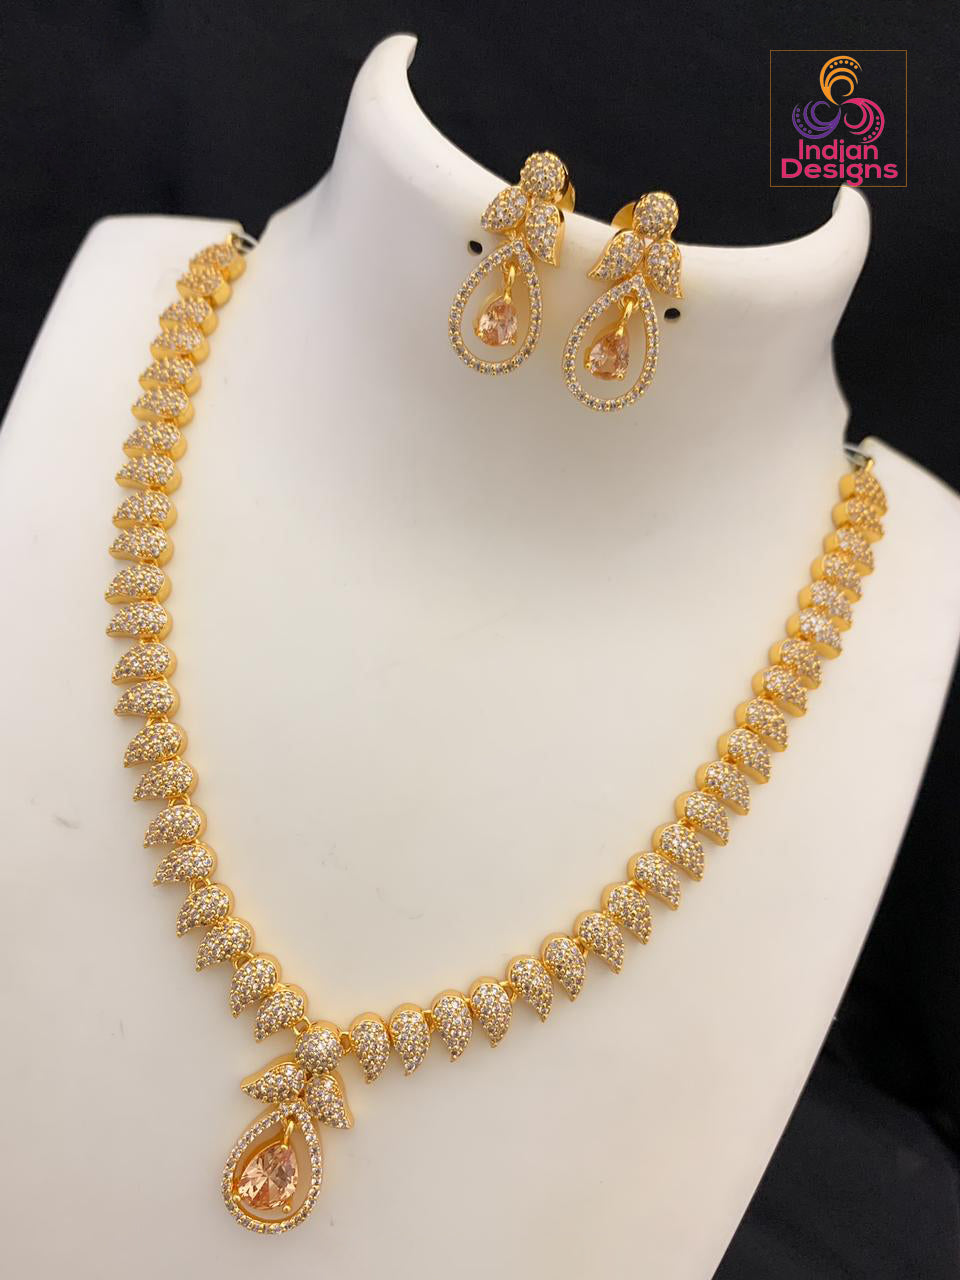 Gold-plated American diamond necklace set with earrings | South Style Indian wedding jewelry | Ruby emerald stone Cz necklace & earring set